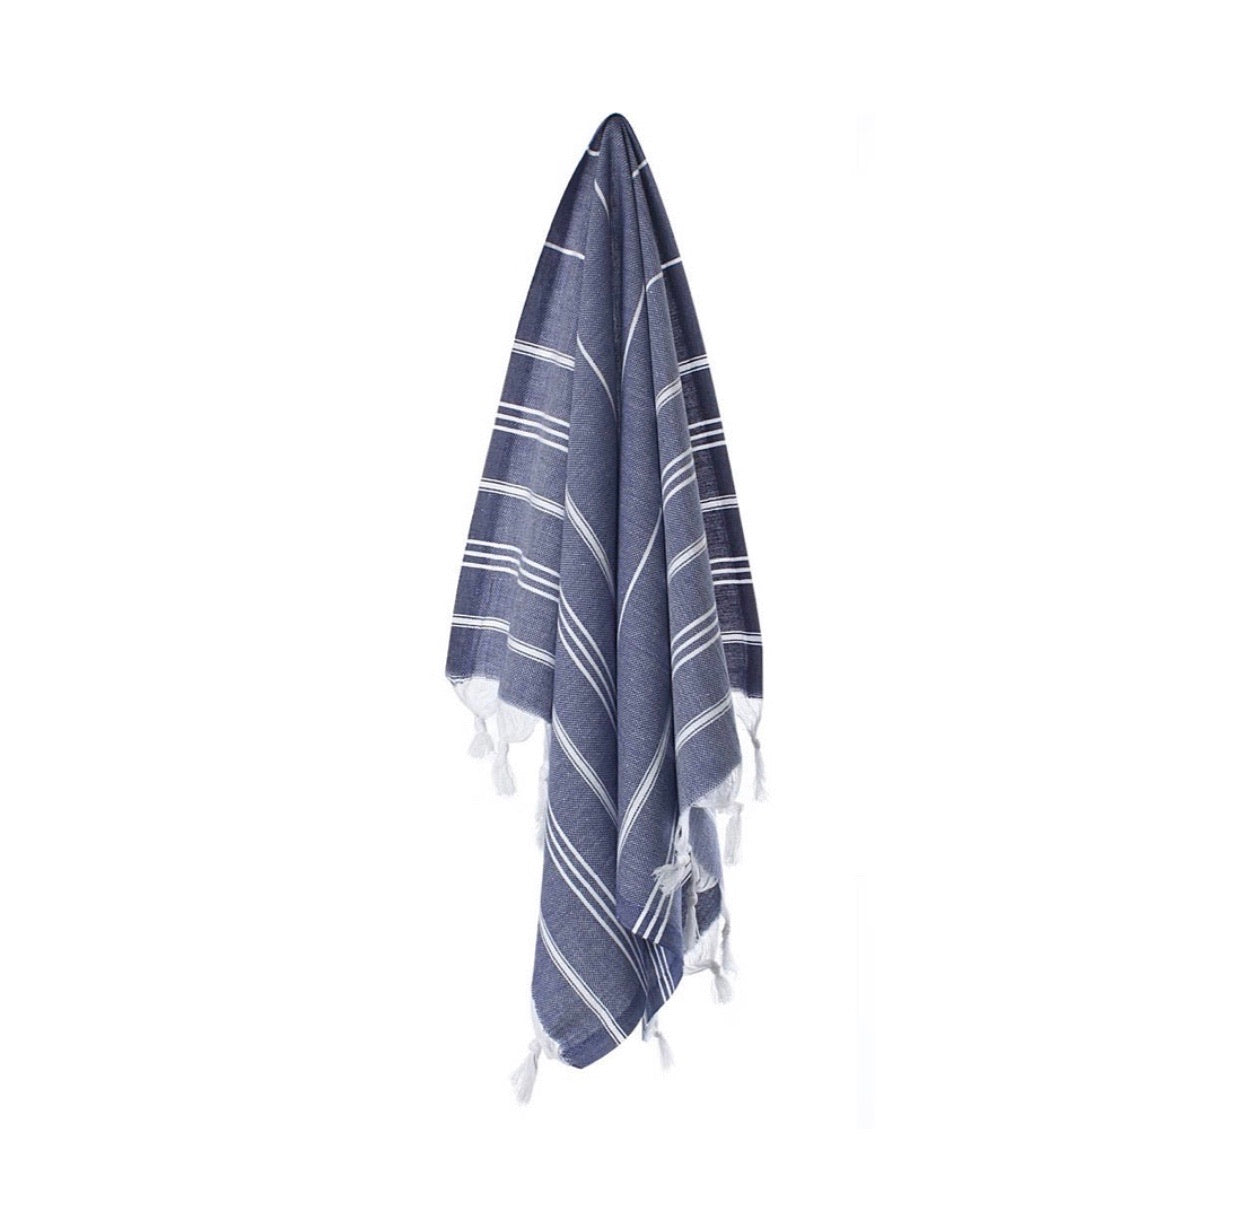 Turkish cotton hand towel in Navy. Known for its softness, absorbency, quick dry, and antimicrobial properties.